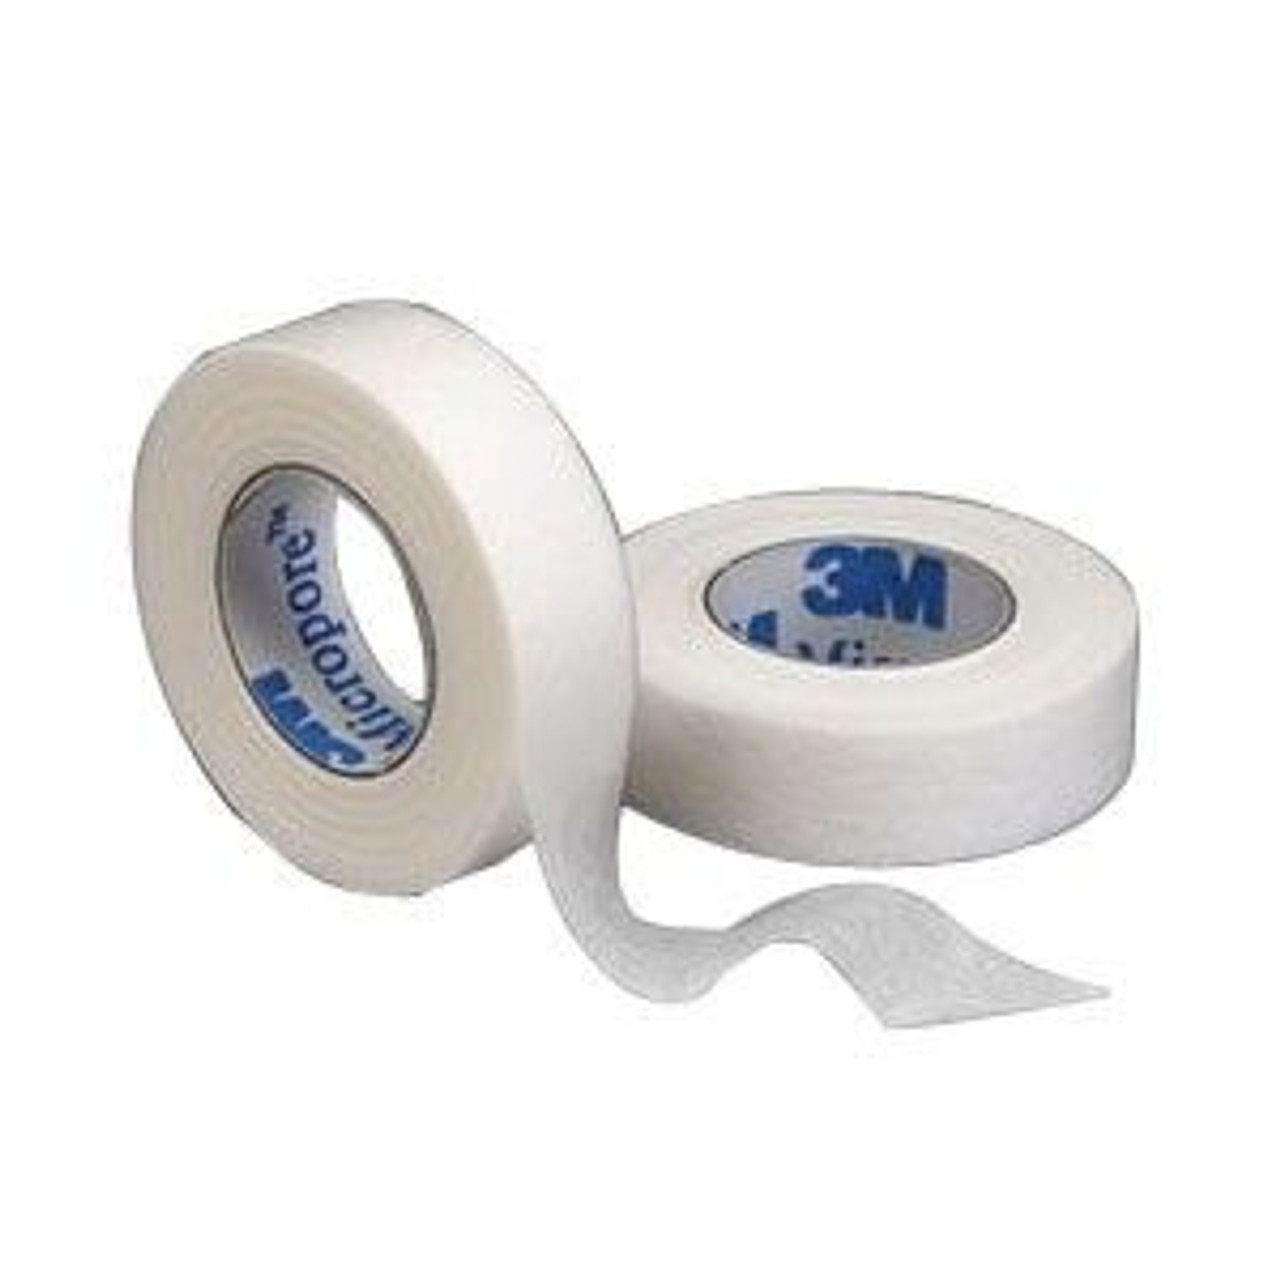 Surgical Tape 3M Micropore 2" x 10 Yard White with Dispenser (3M1535-2) 6 rolls/box